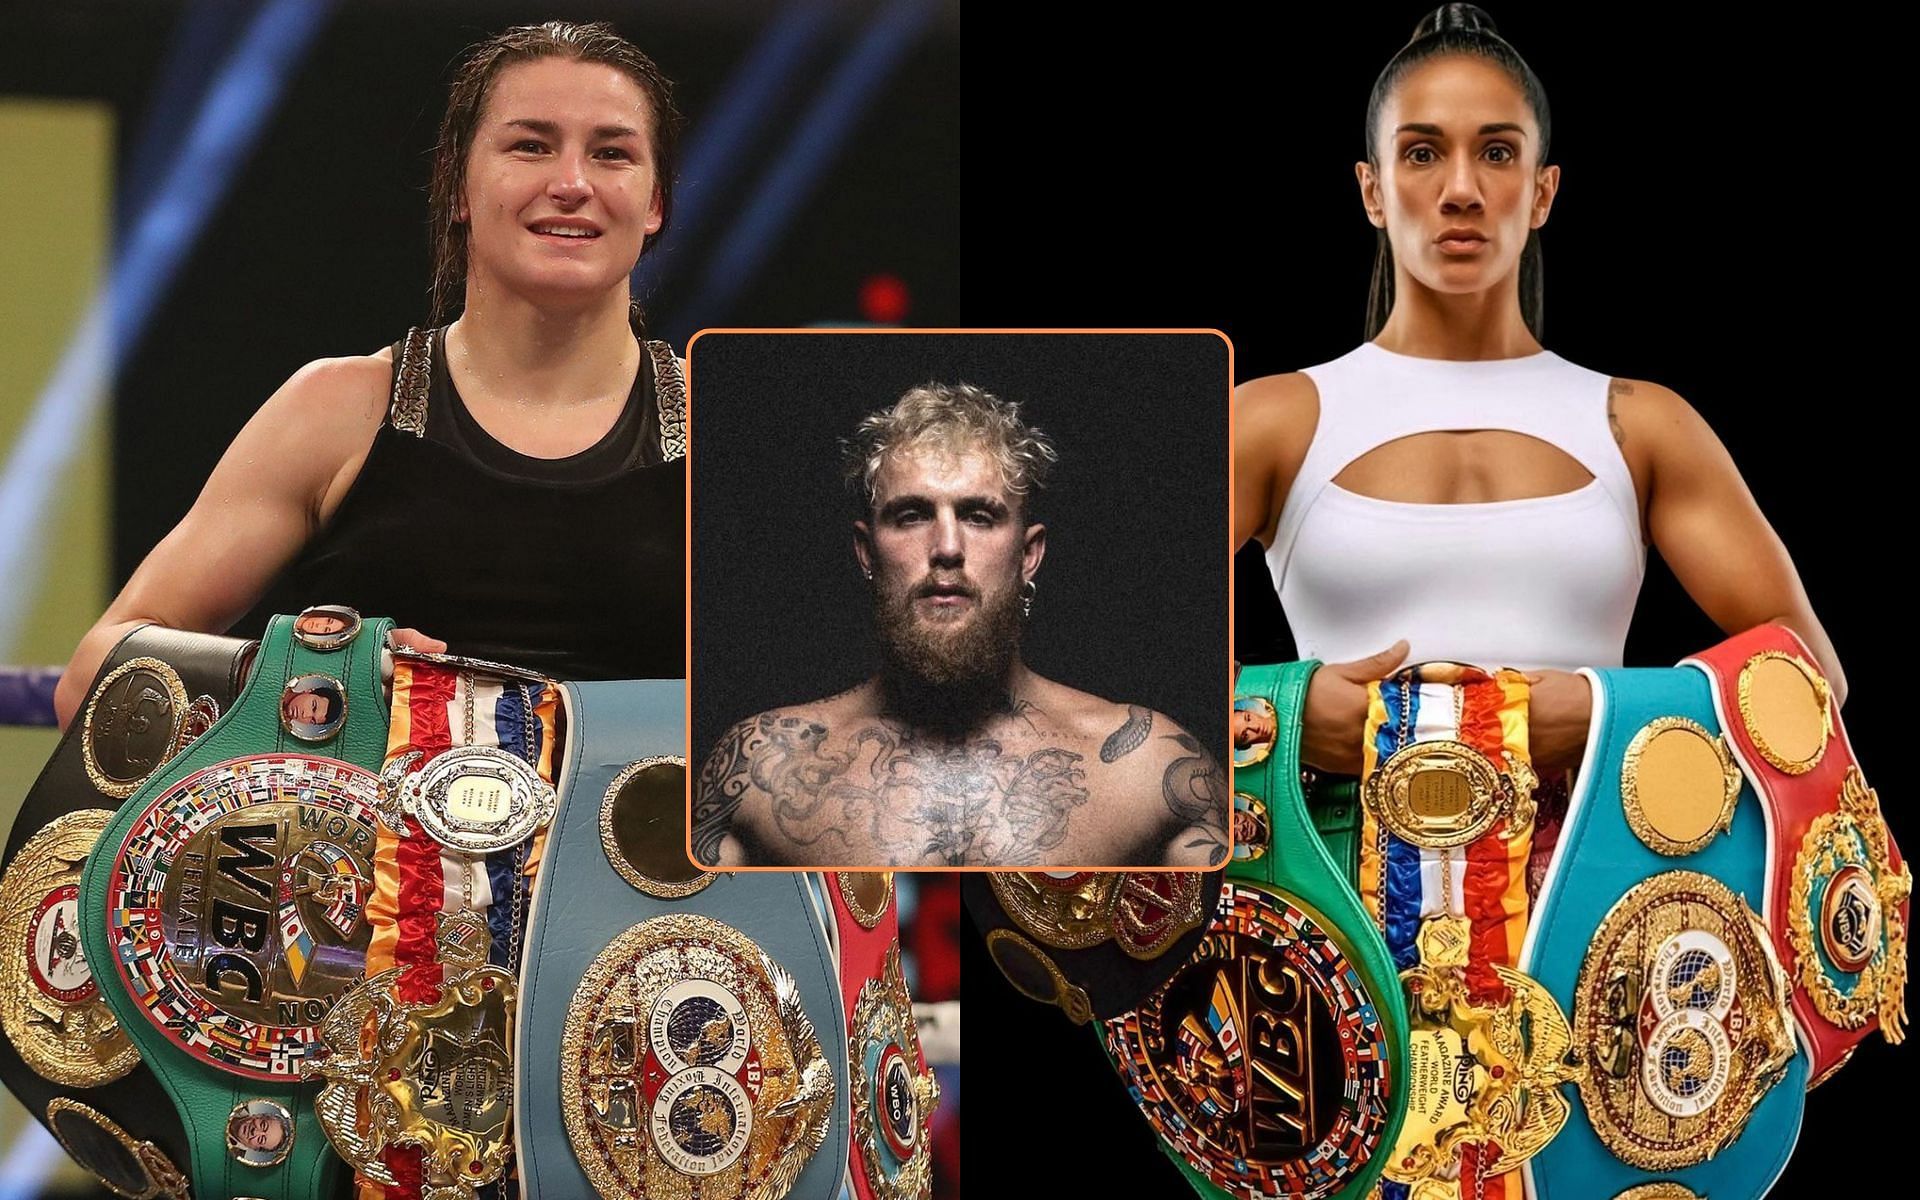 Jake Paul offers strong projections for Katie Taylor vs. Amanda Serrano 2 rematch